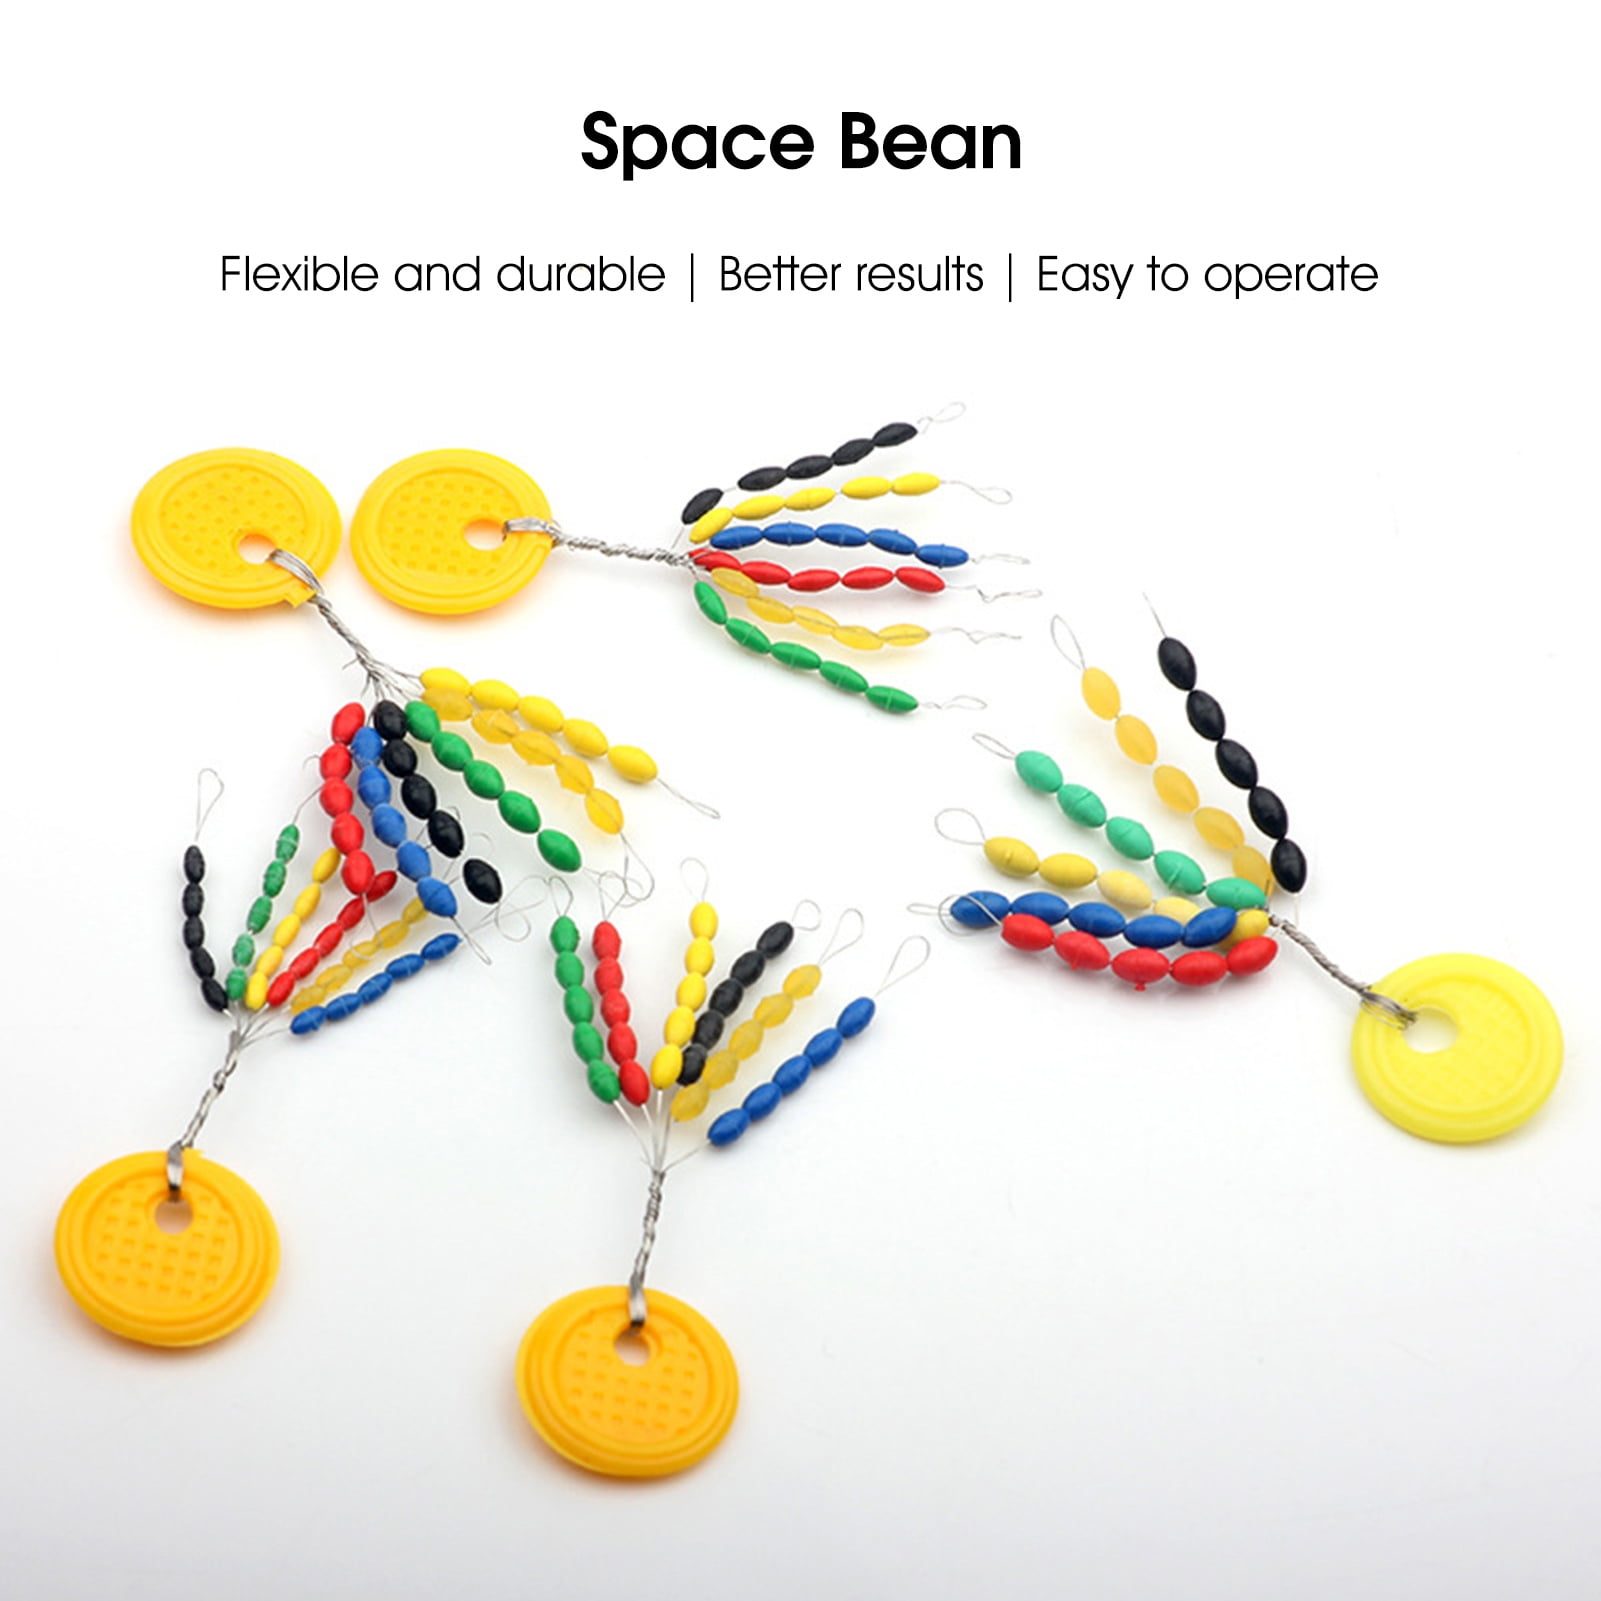 Juhai Rubber Space Beans Bobber Colorful Stable Oval Design Float